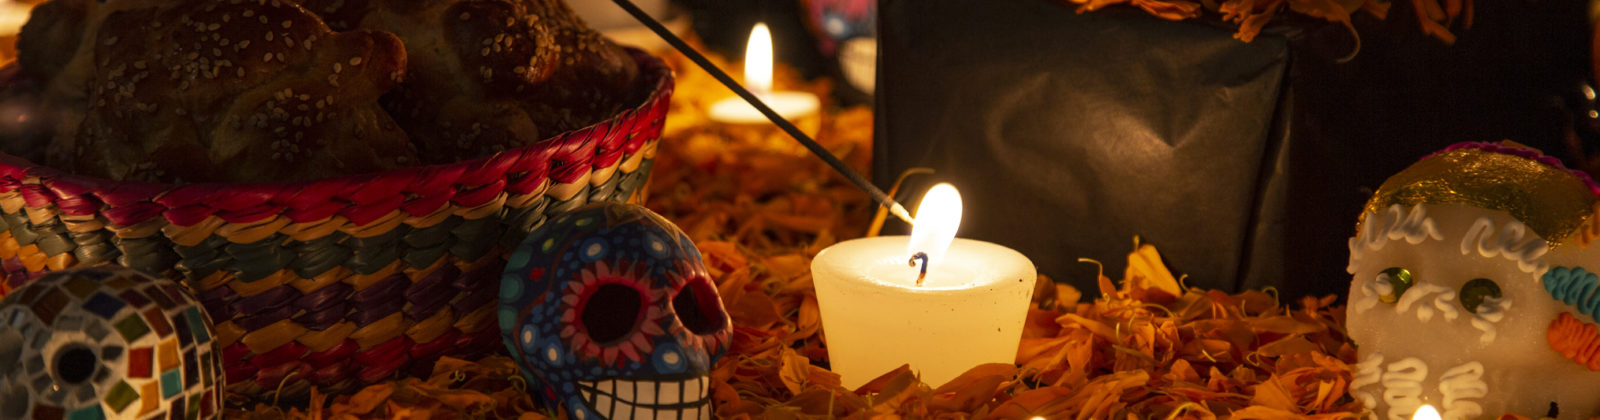 Hand holding incense stick over "ofrenda" for the Day of the Dead in Puebla, Pue., Mexico